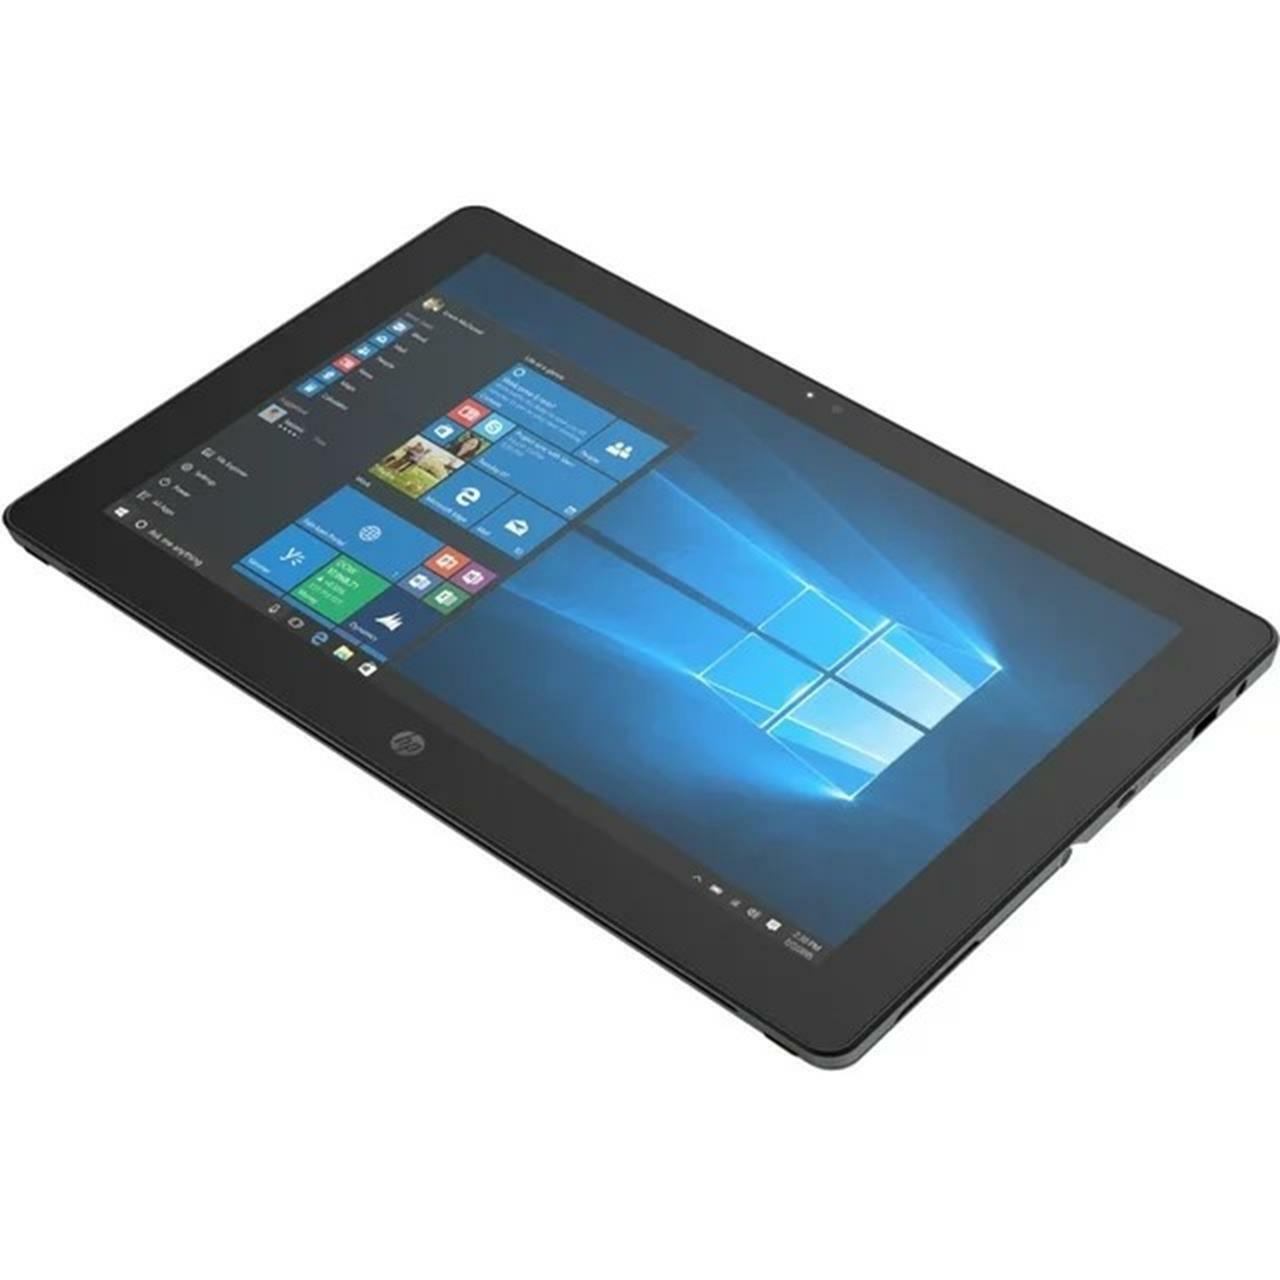 Renewed HP Pro x2 612 G2: Core i7-7Y75, 256 GB 8GB DDR4 - Elevate Your Computing Experience!